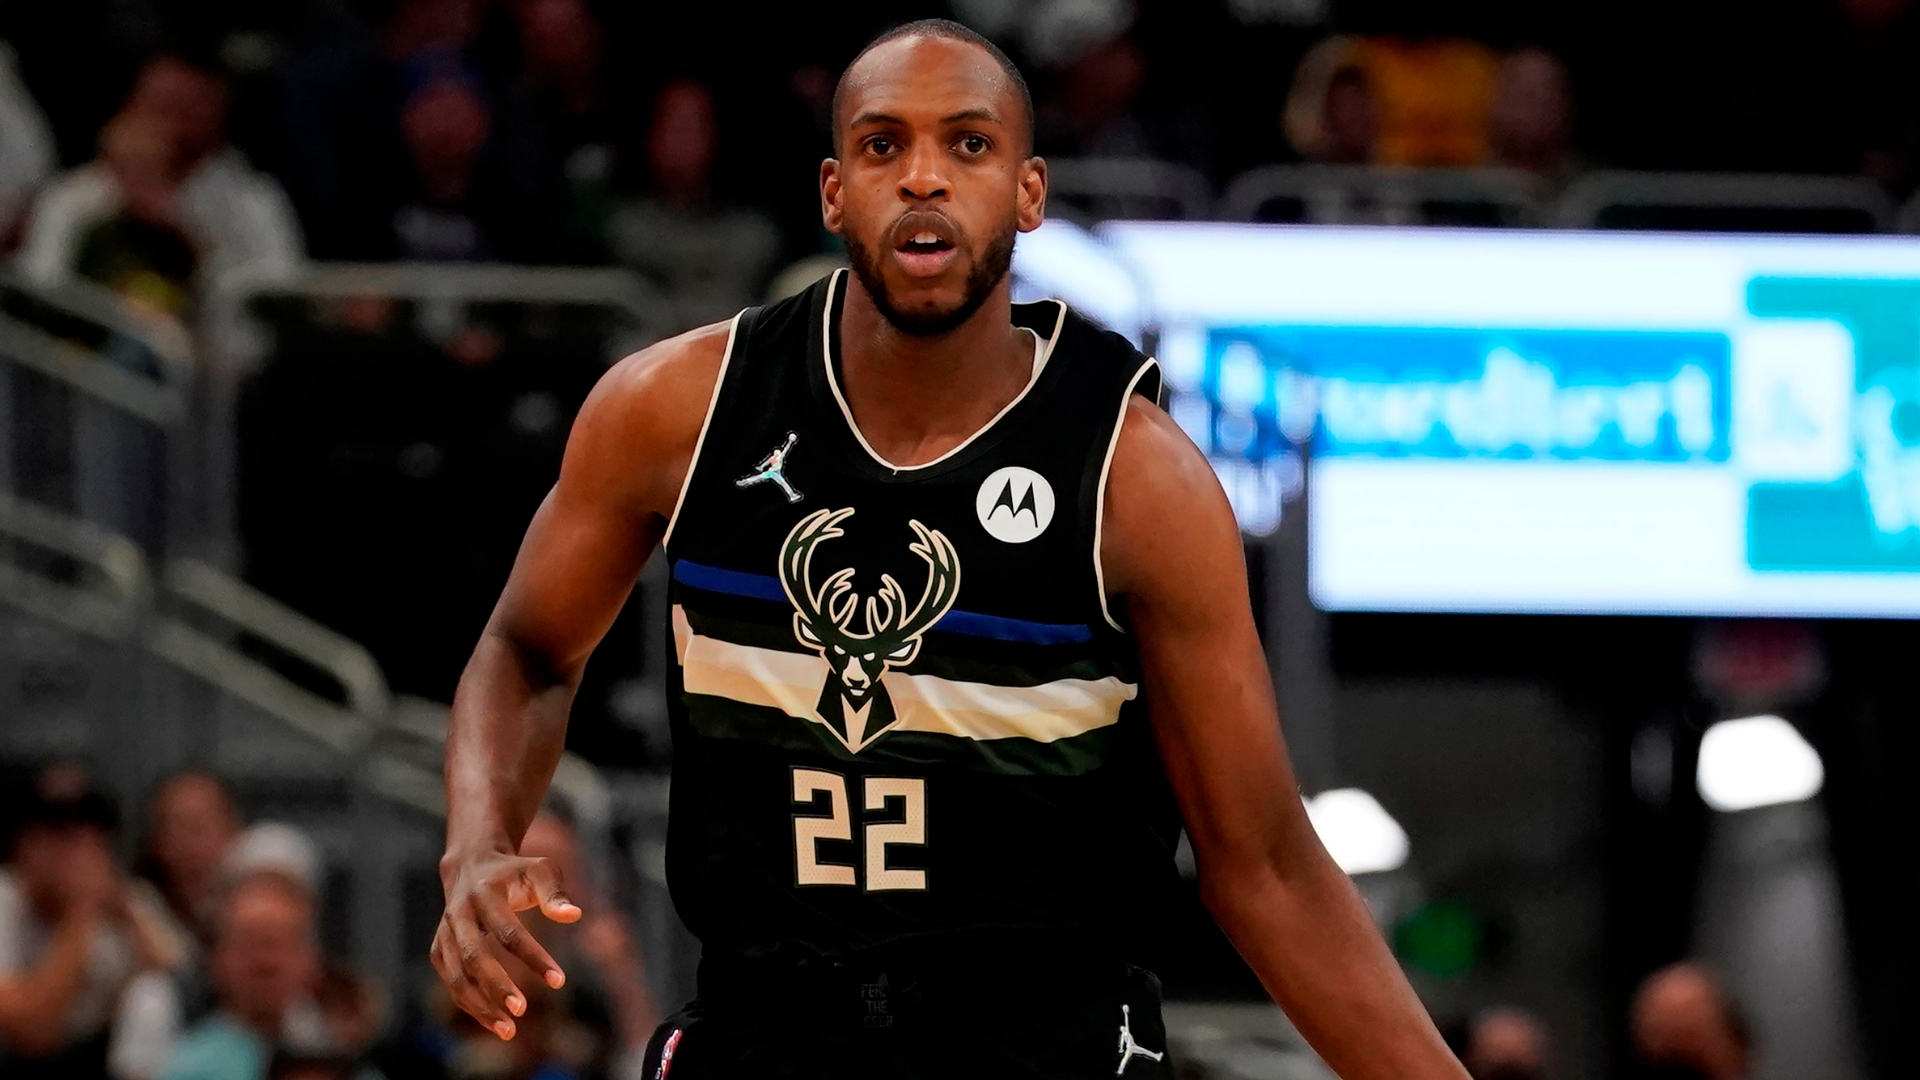 Khris Middleton passes Ray Allen to become Bucks all-time leader for 3-pointers made